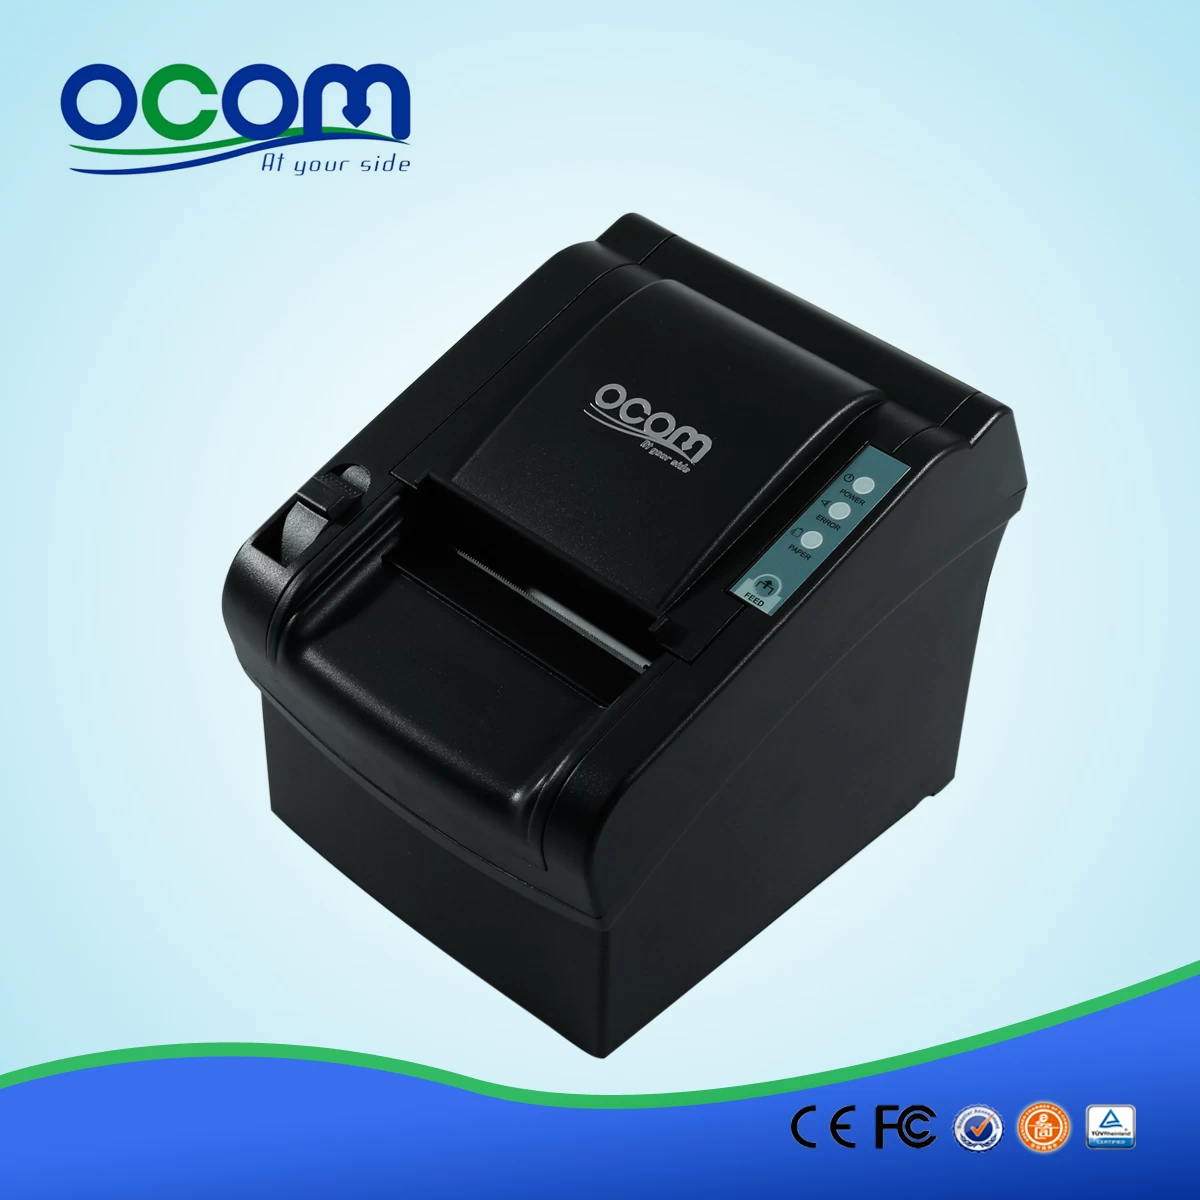 China made low cost  80mm thermal receipt printer-OCPP-802